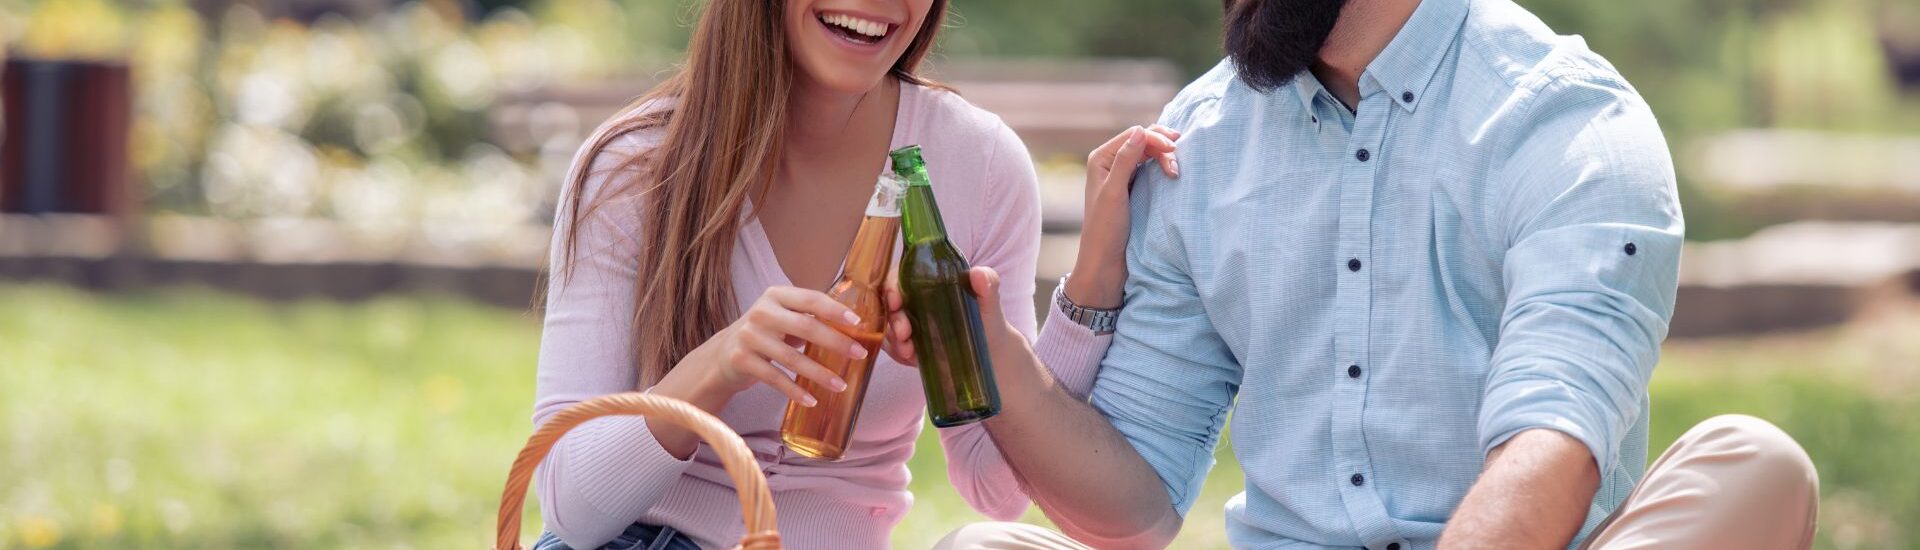 A couple drinks beer while having a picnic on a blanket outside in a park